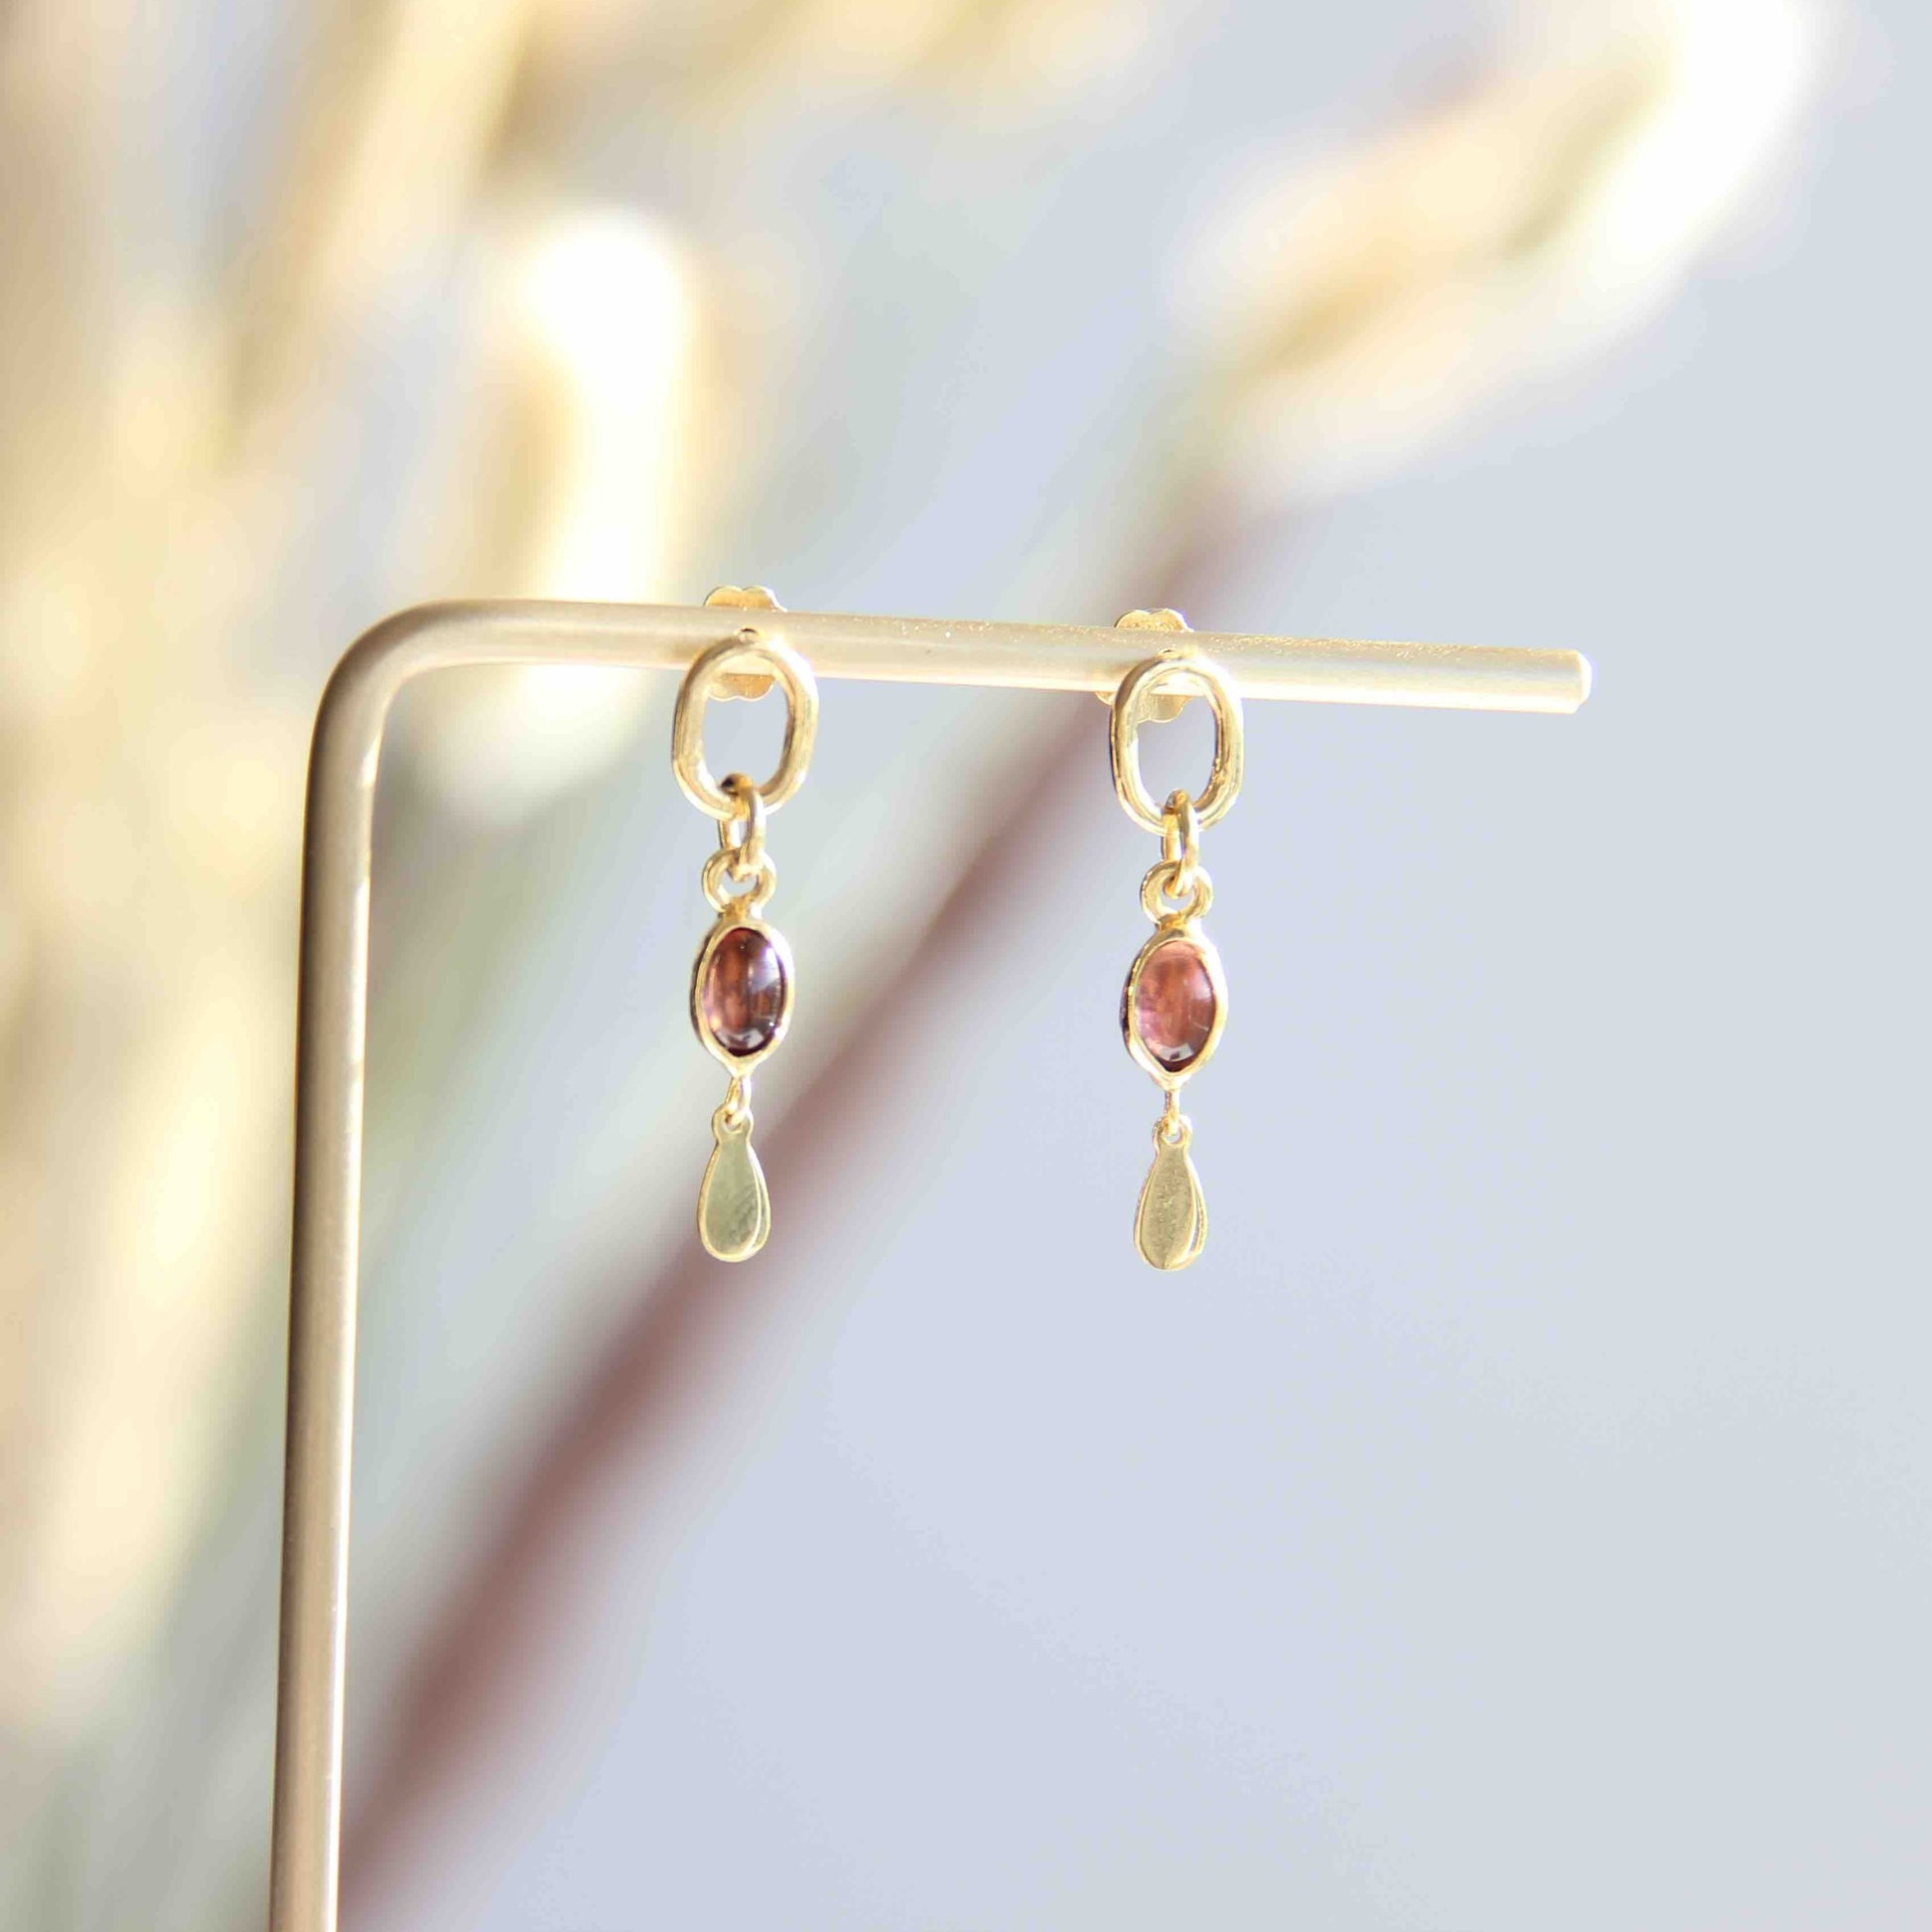 Inspired by the Mediterranean and Greek vibes, we designed these unique Beautiful Tourmaline Earrings with 14k gold micro plated for long lasting on solid 925 Sterling Silver.